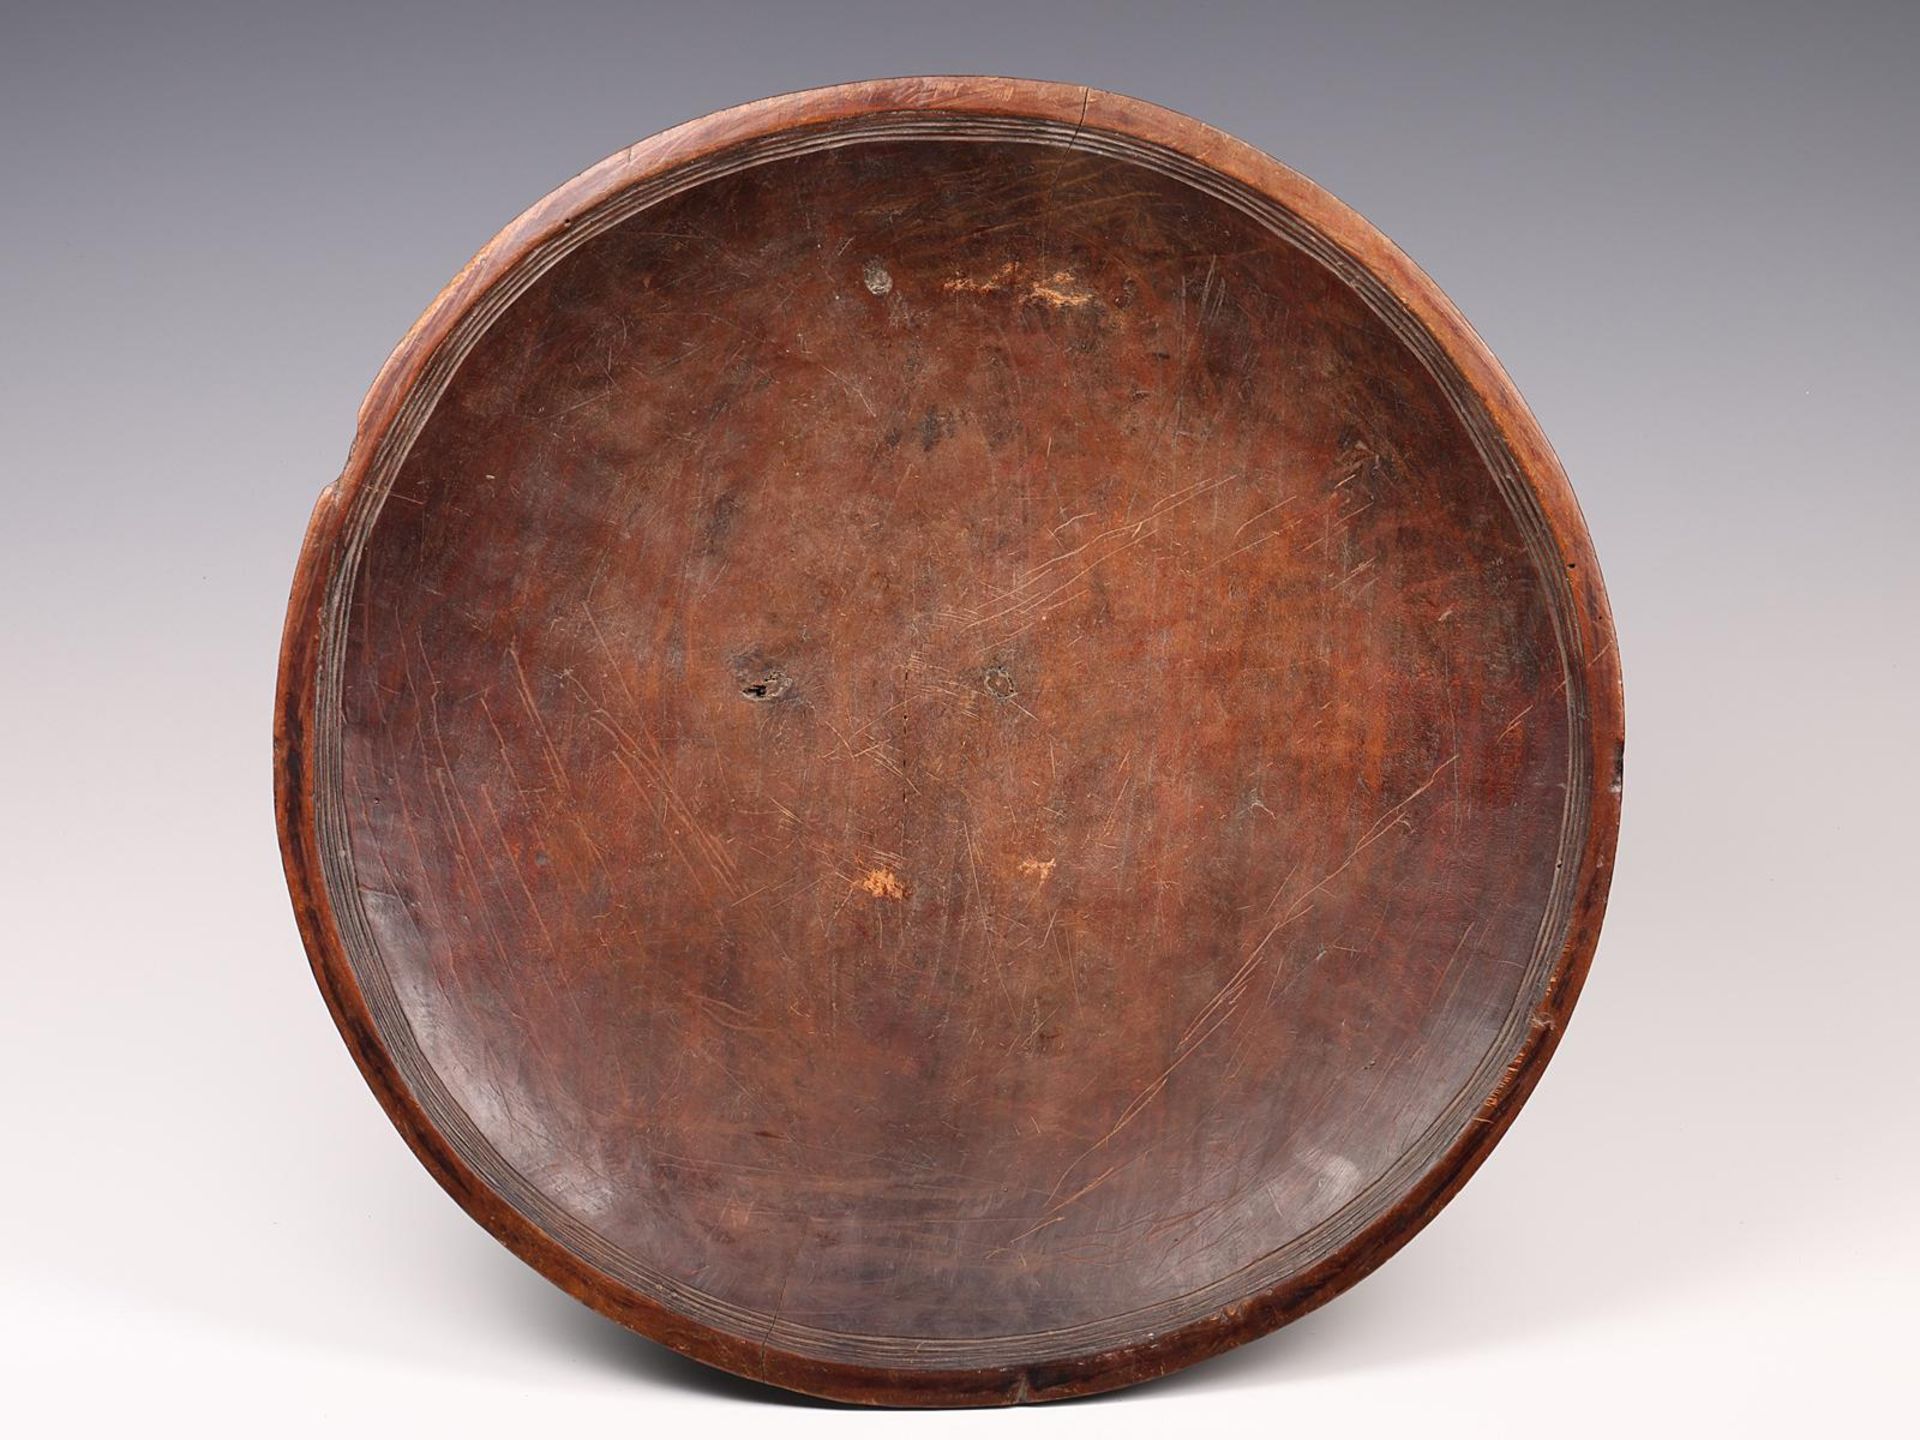 Ethiopia, a fine wooden food platter on a conical stand - Image 2 of 4